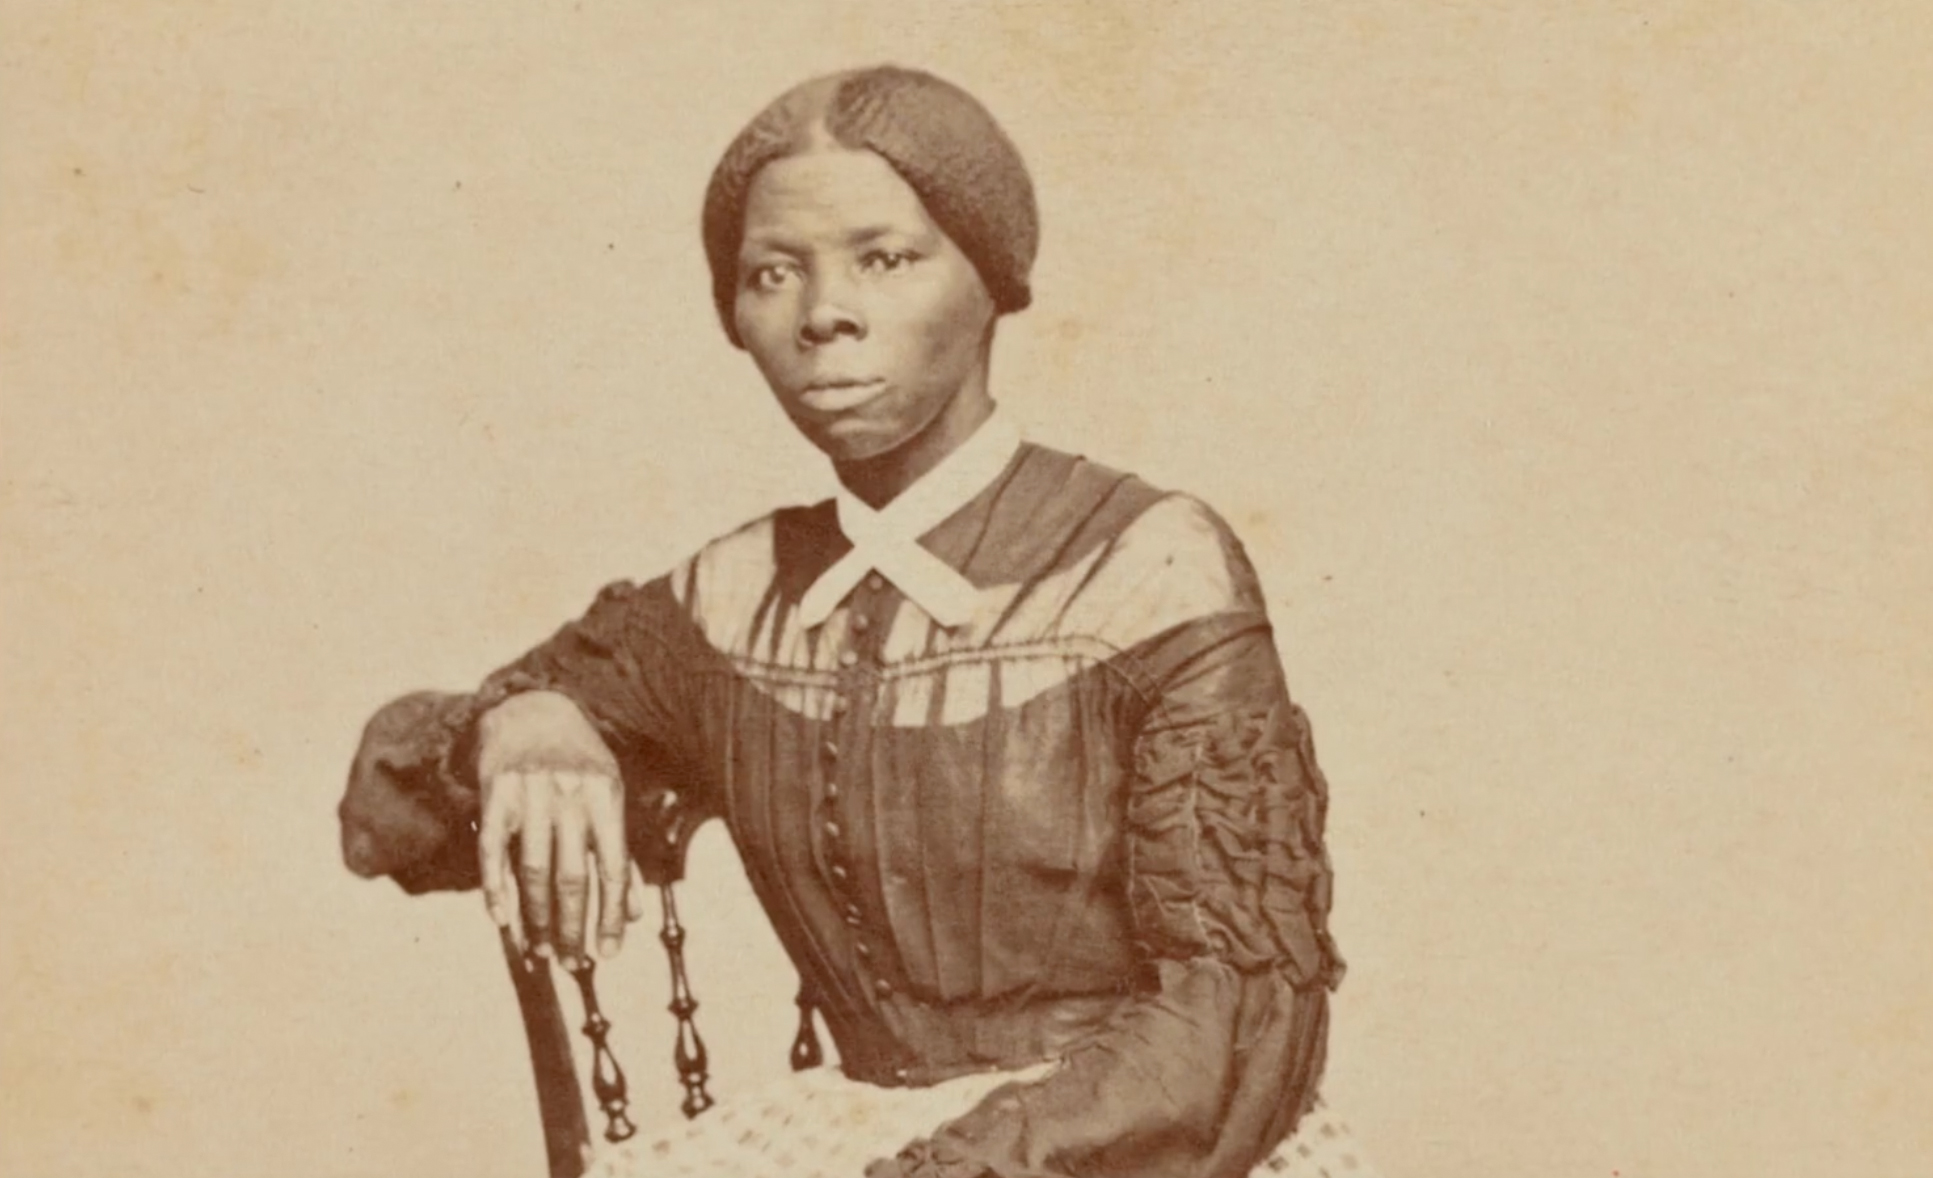 Portrait of Harriet Tubman, embodying her extraordinary life which remained concealed from her family for many years, underscoring the layers of untold stories in history.